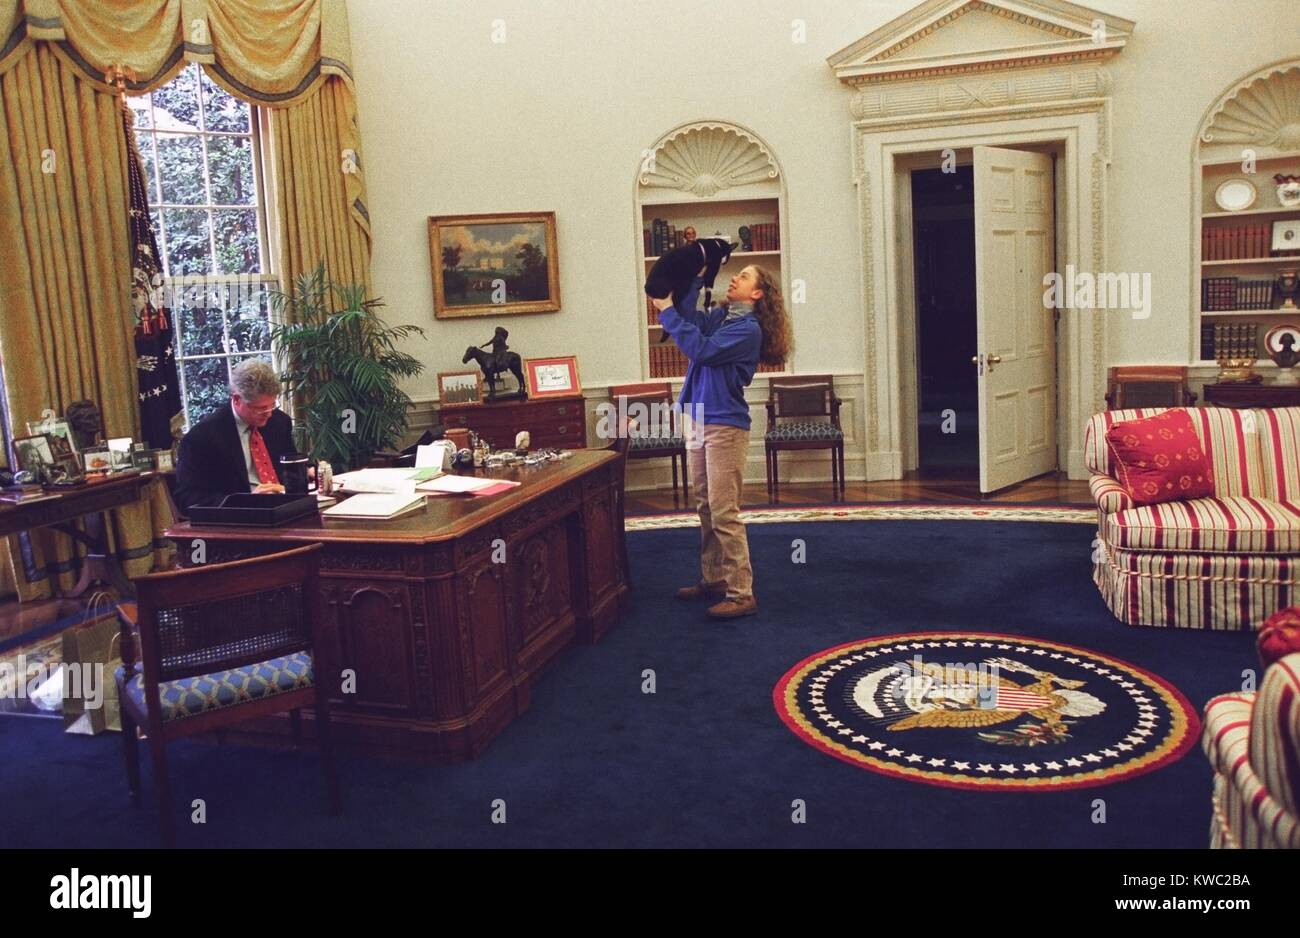 Chelsea Clinton Playing with Socks the Cat in the Oval Office. At left, President Bill Clinton Works at his desk. Dec. 24, 1994. (BSLOC 2015 2 201) Stock Photo